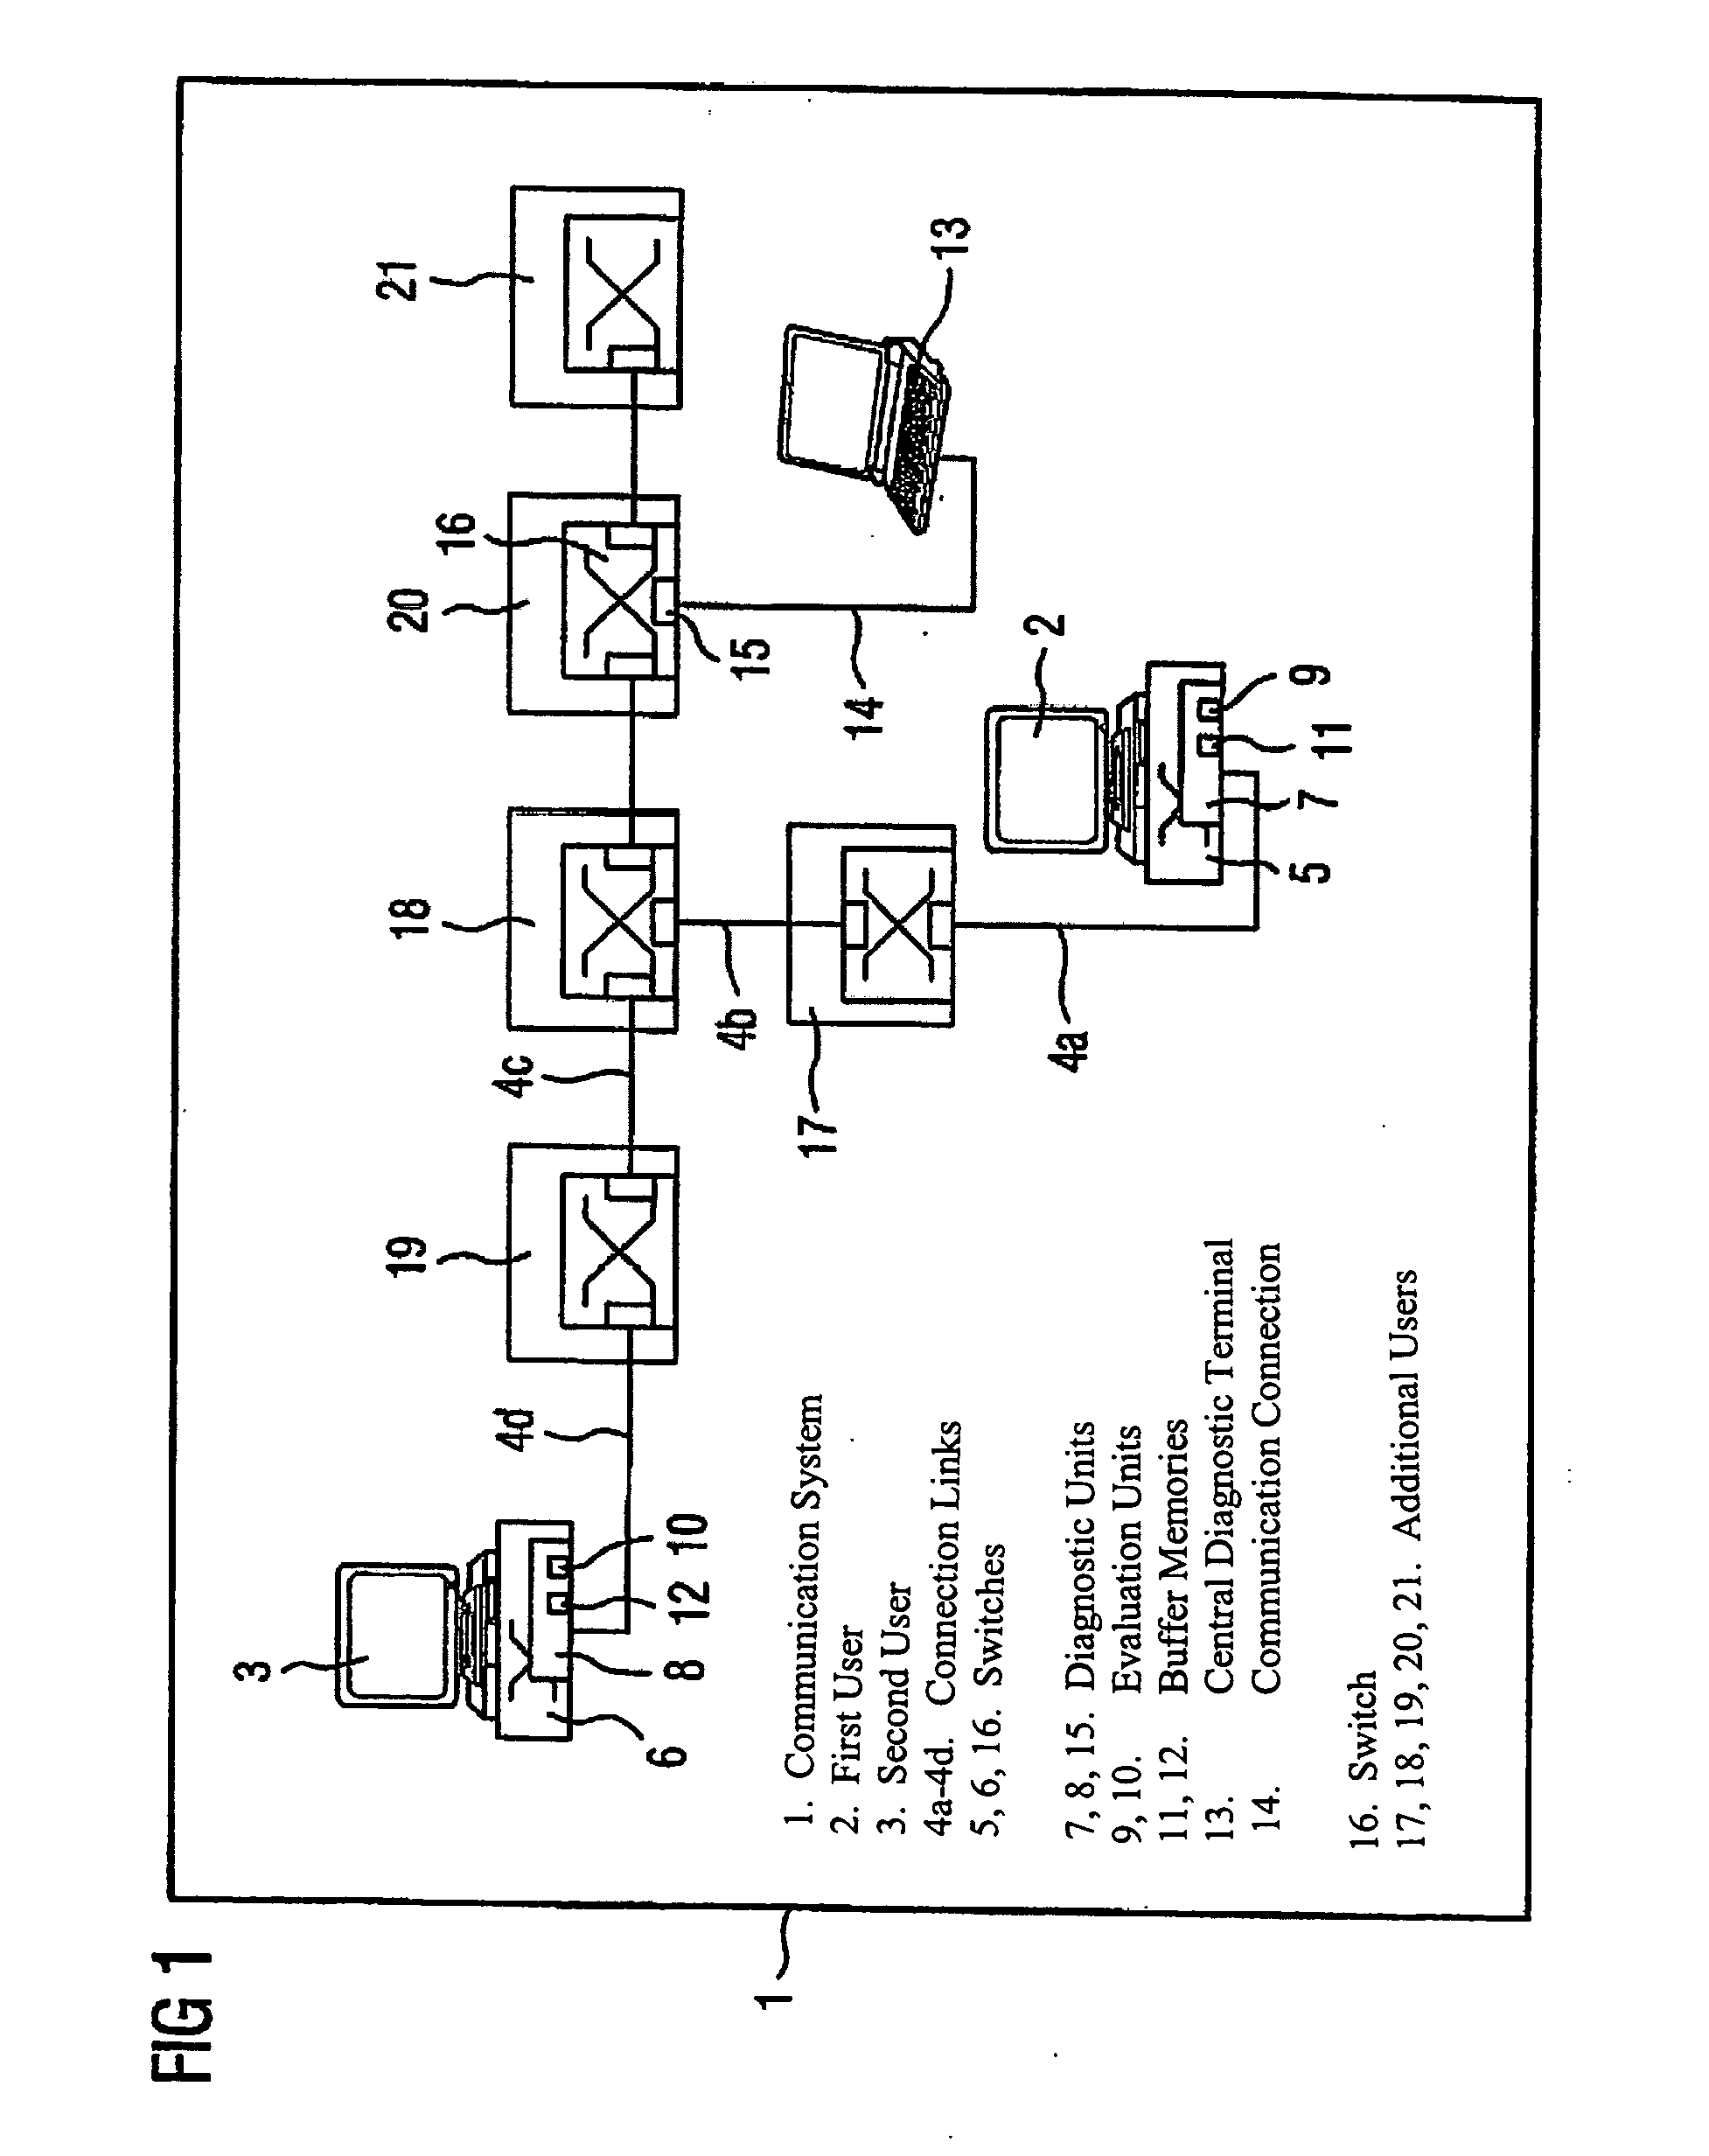 Communication system with users and diagnostic units